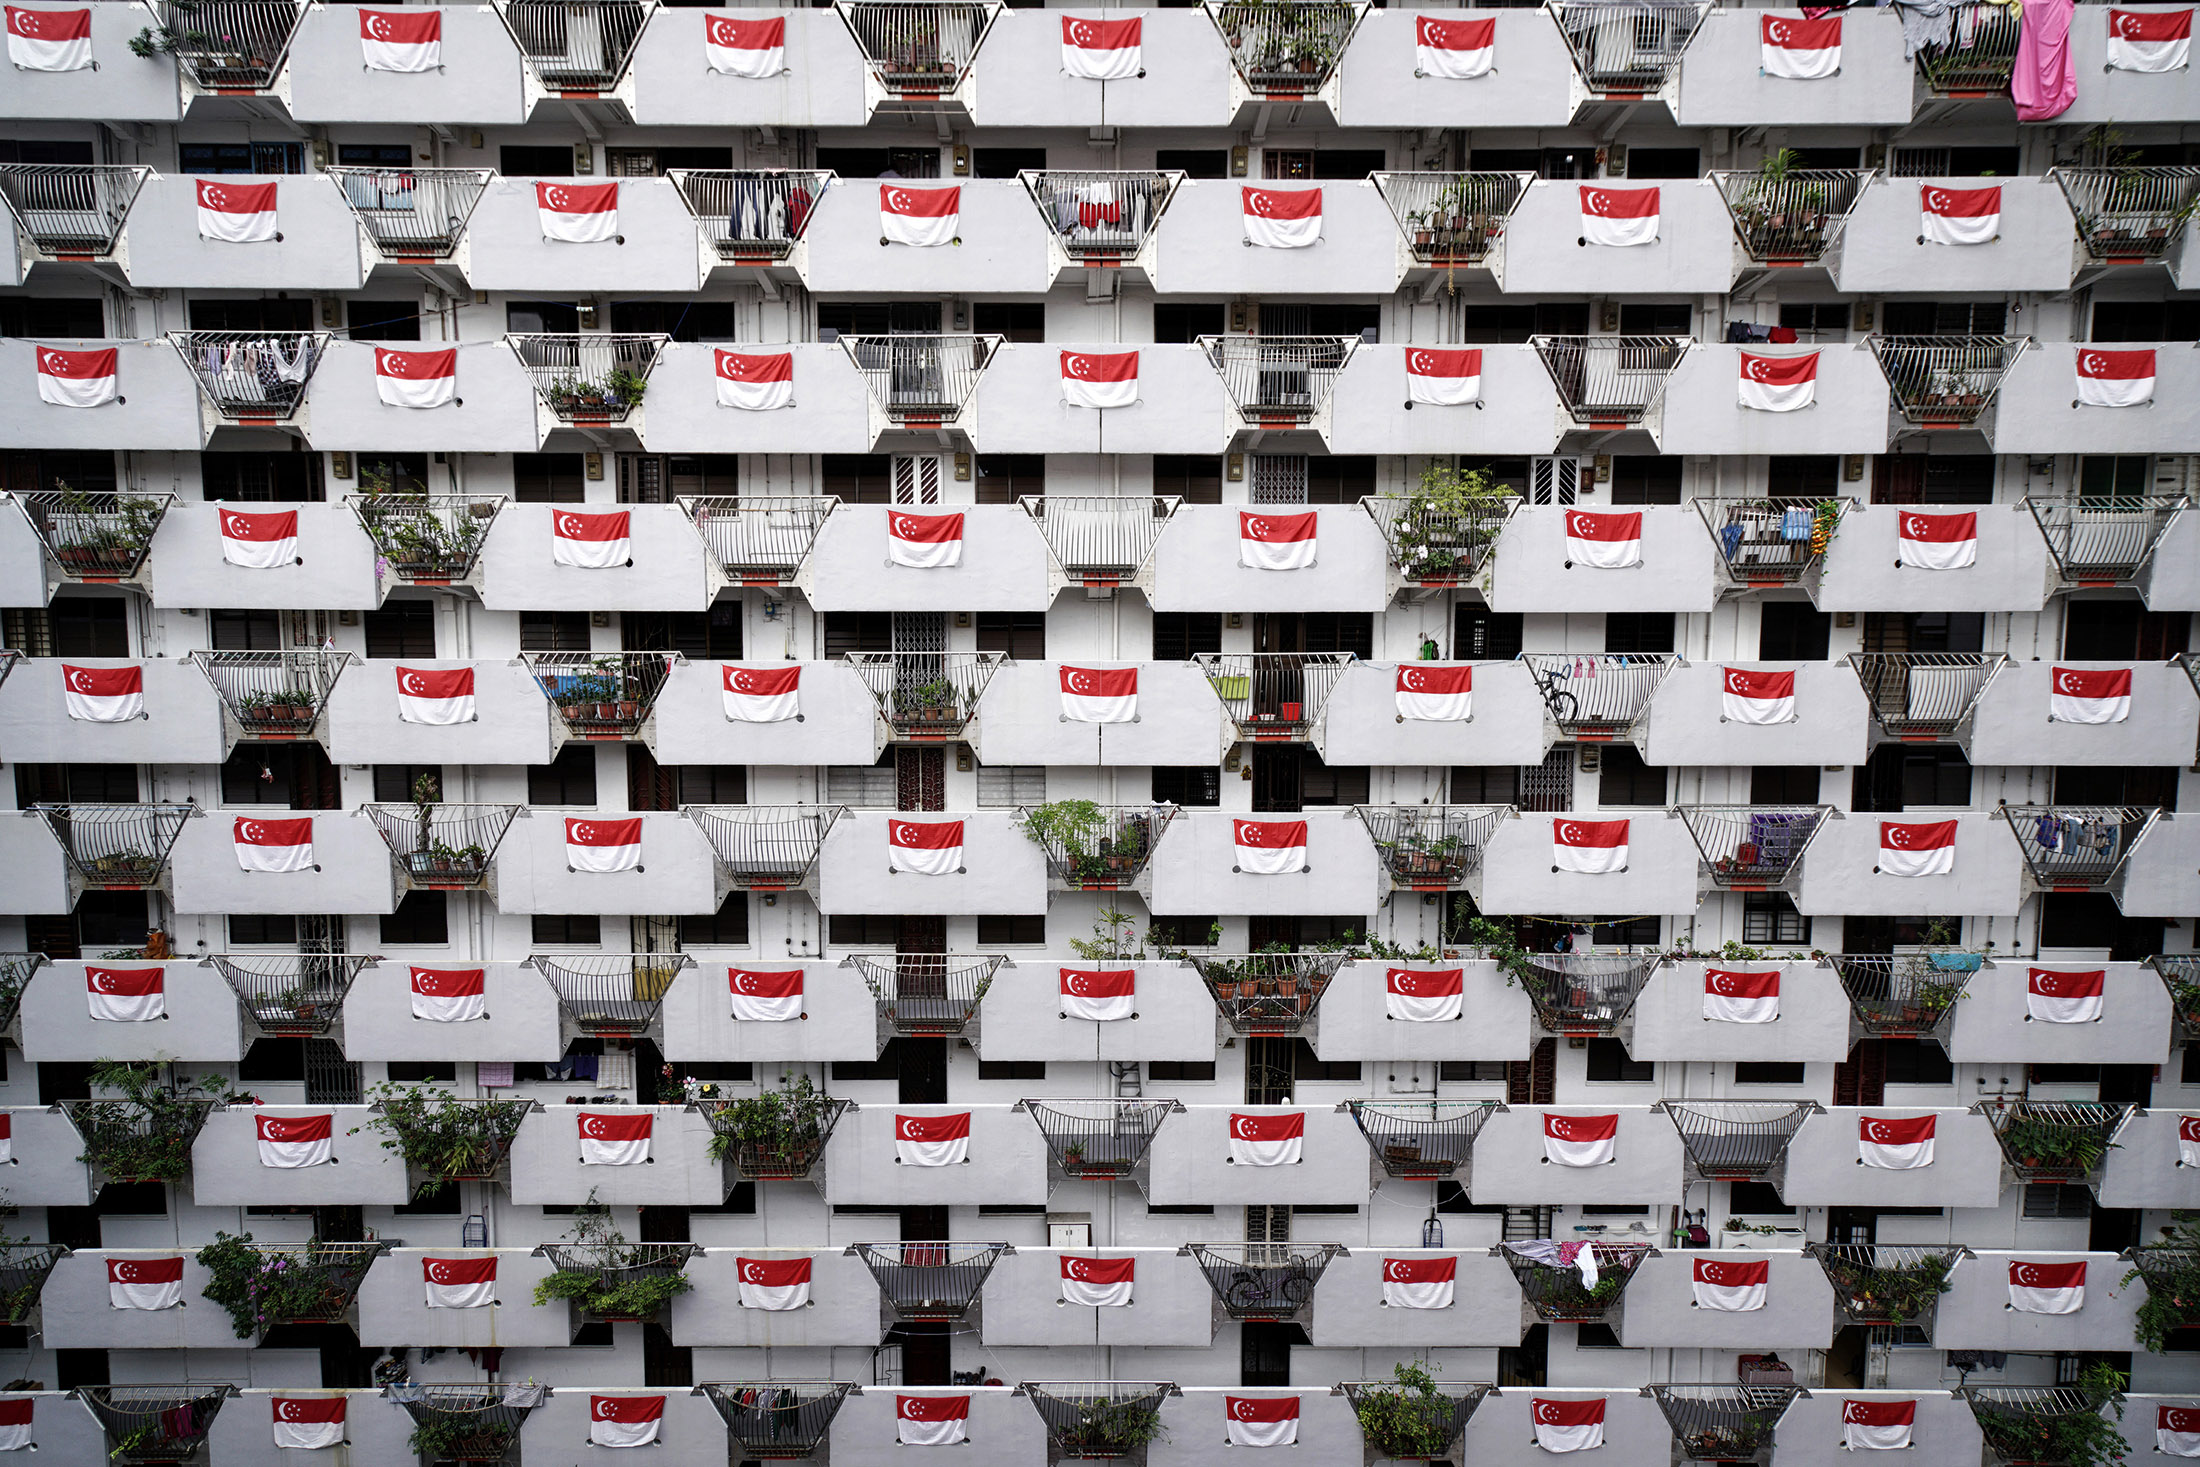 Singapore national flags are displayed on a residential apartment block in Singapore.
